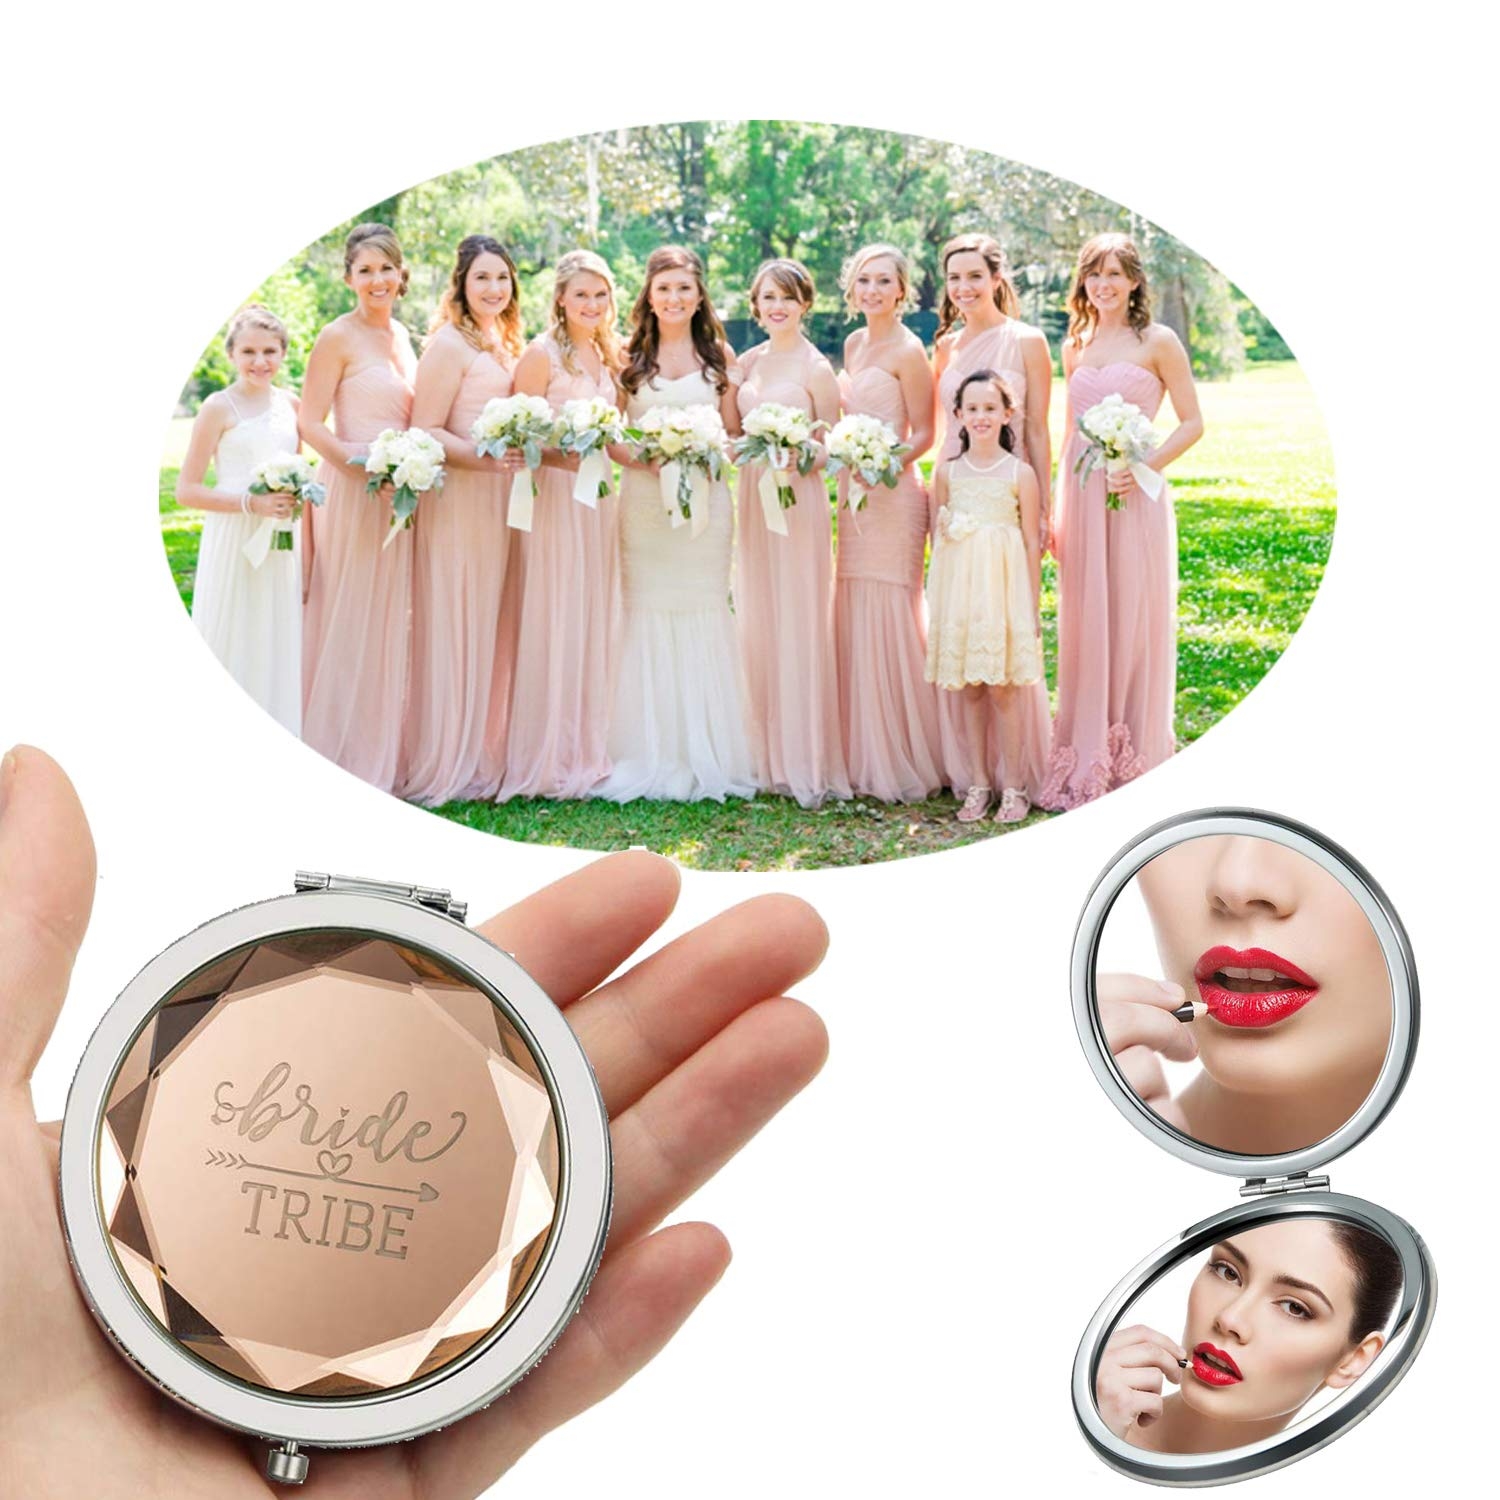 Cuterui Bridesmaid Gifts Bride Tribe Compact Makeup Mirrors for Bachelorette Bridal Shower Gifts(Pack of 6,Champagne)